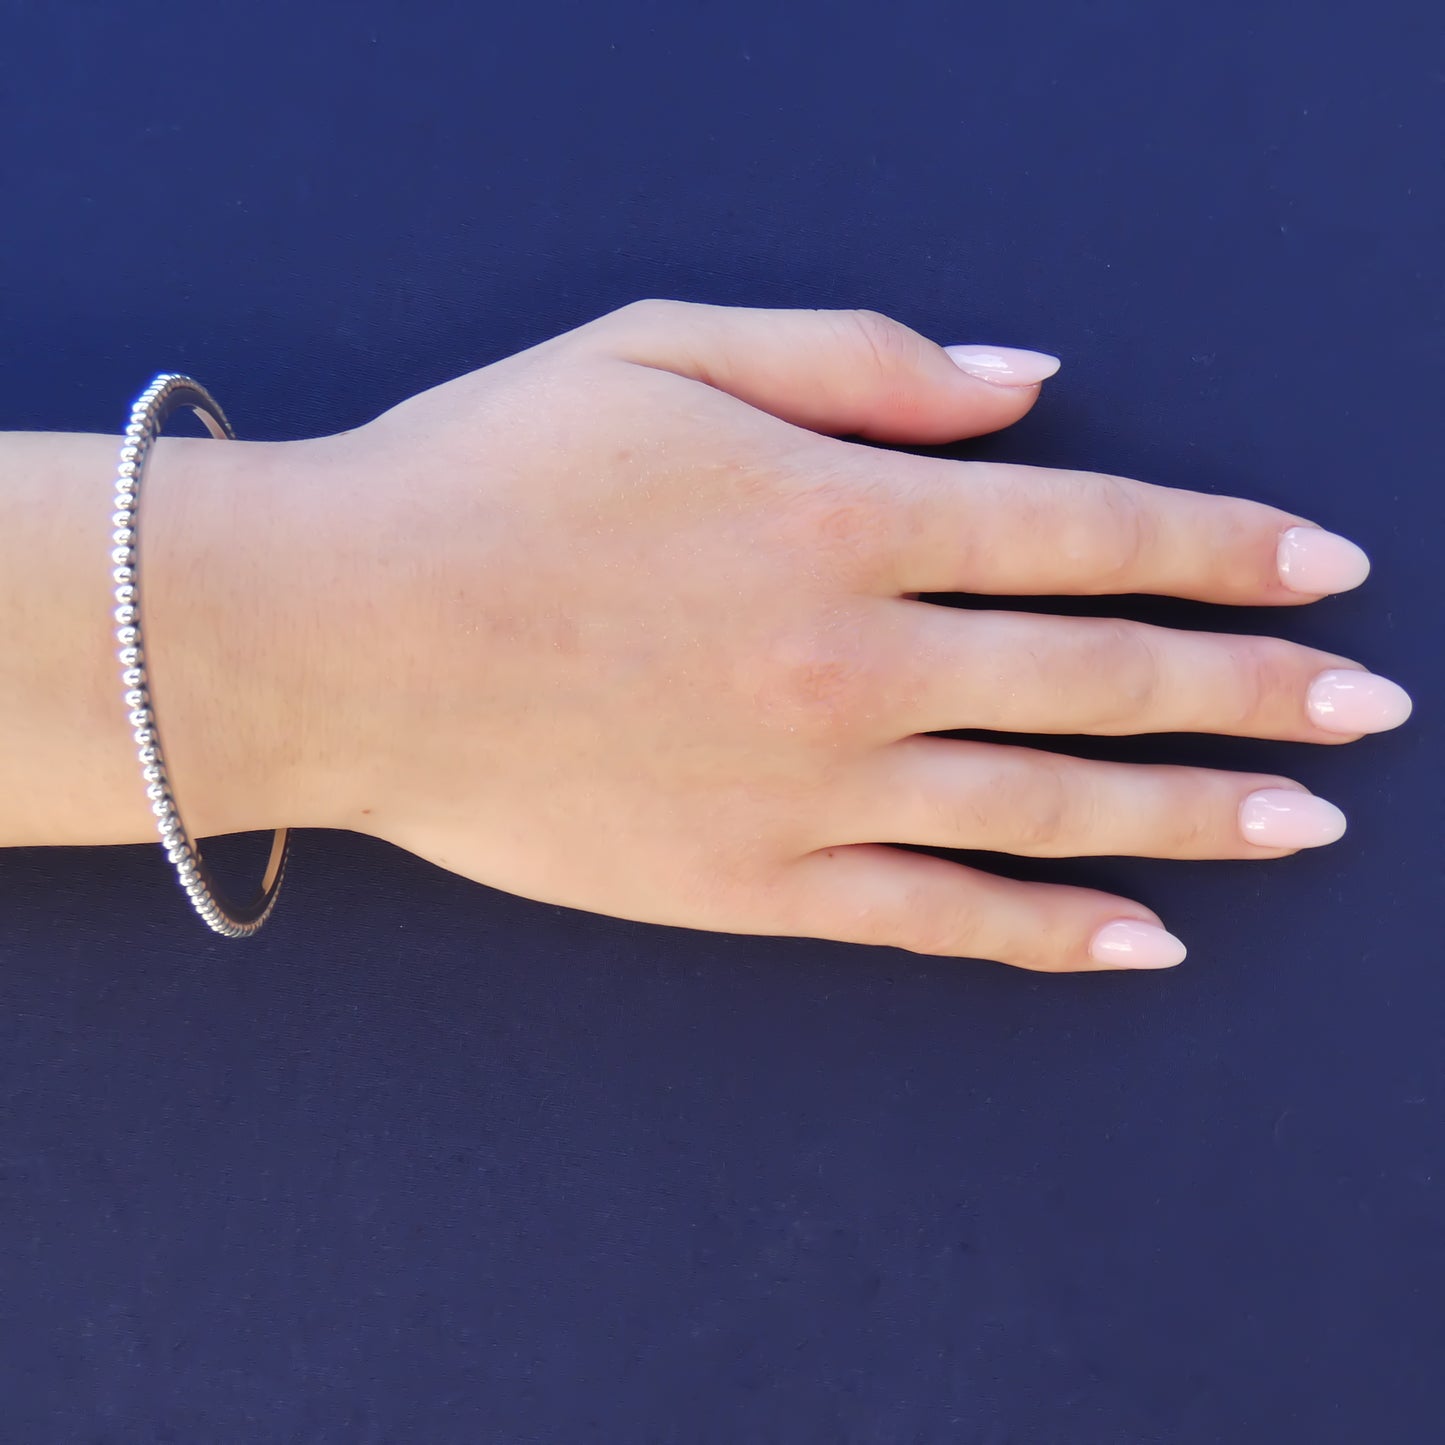 Woman wearing a silver bangle bracelet with a hammered center and beaded edge.